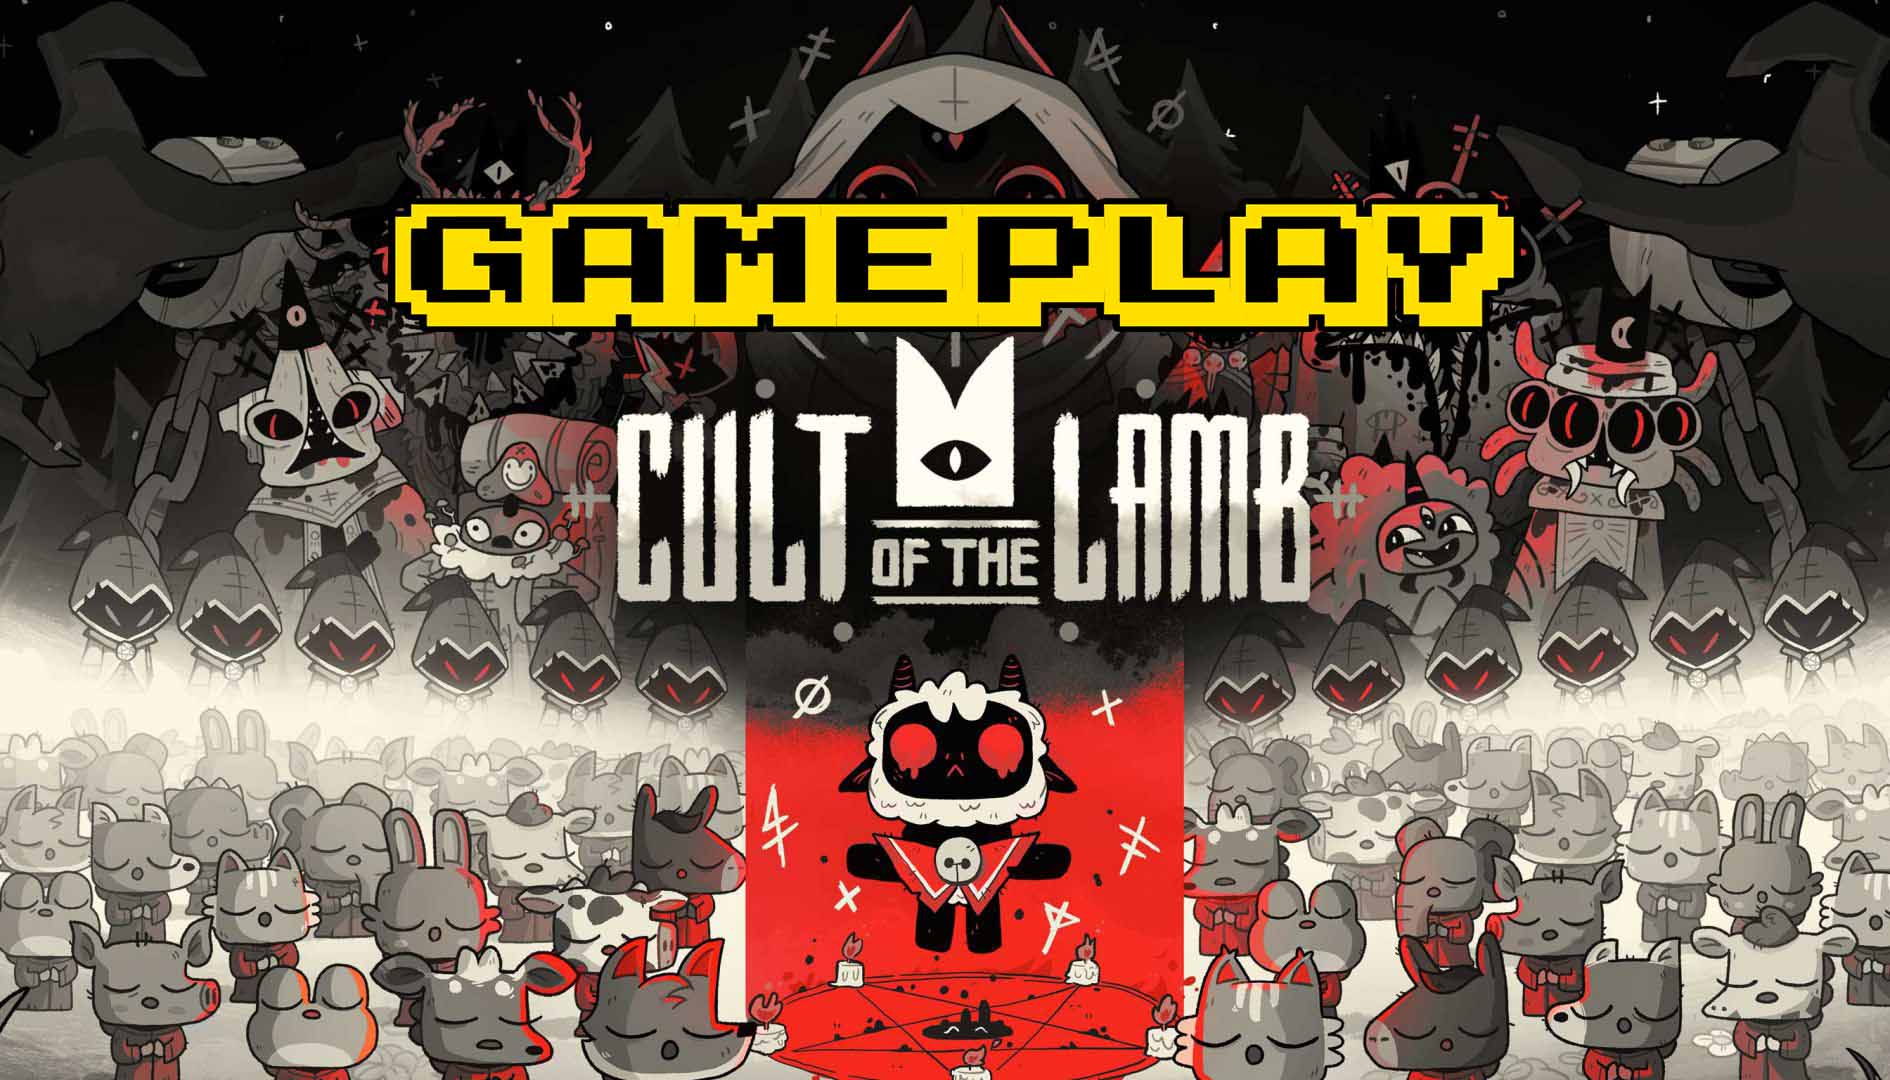 Category:Gameplay, Cult of the Lamb Wiki